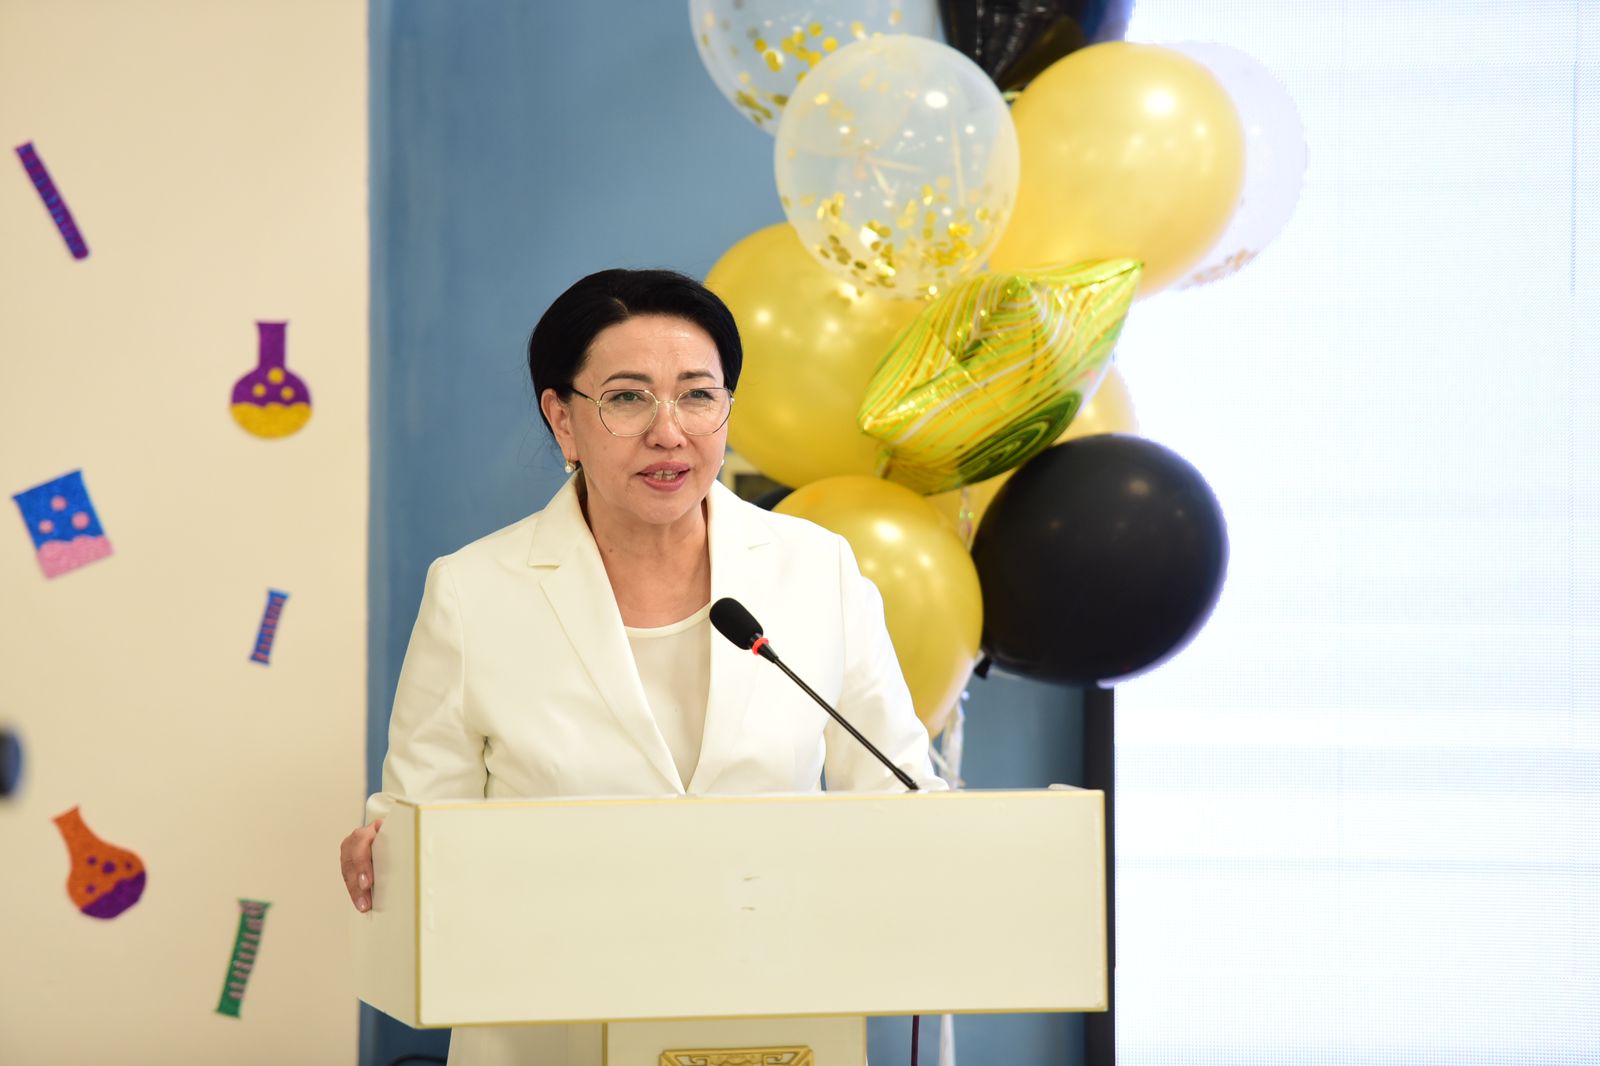  The opening of the Uylesbek Besterekov laboratory was held on the occasion of the international chemists' day